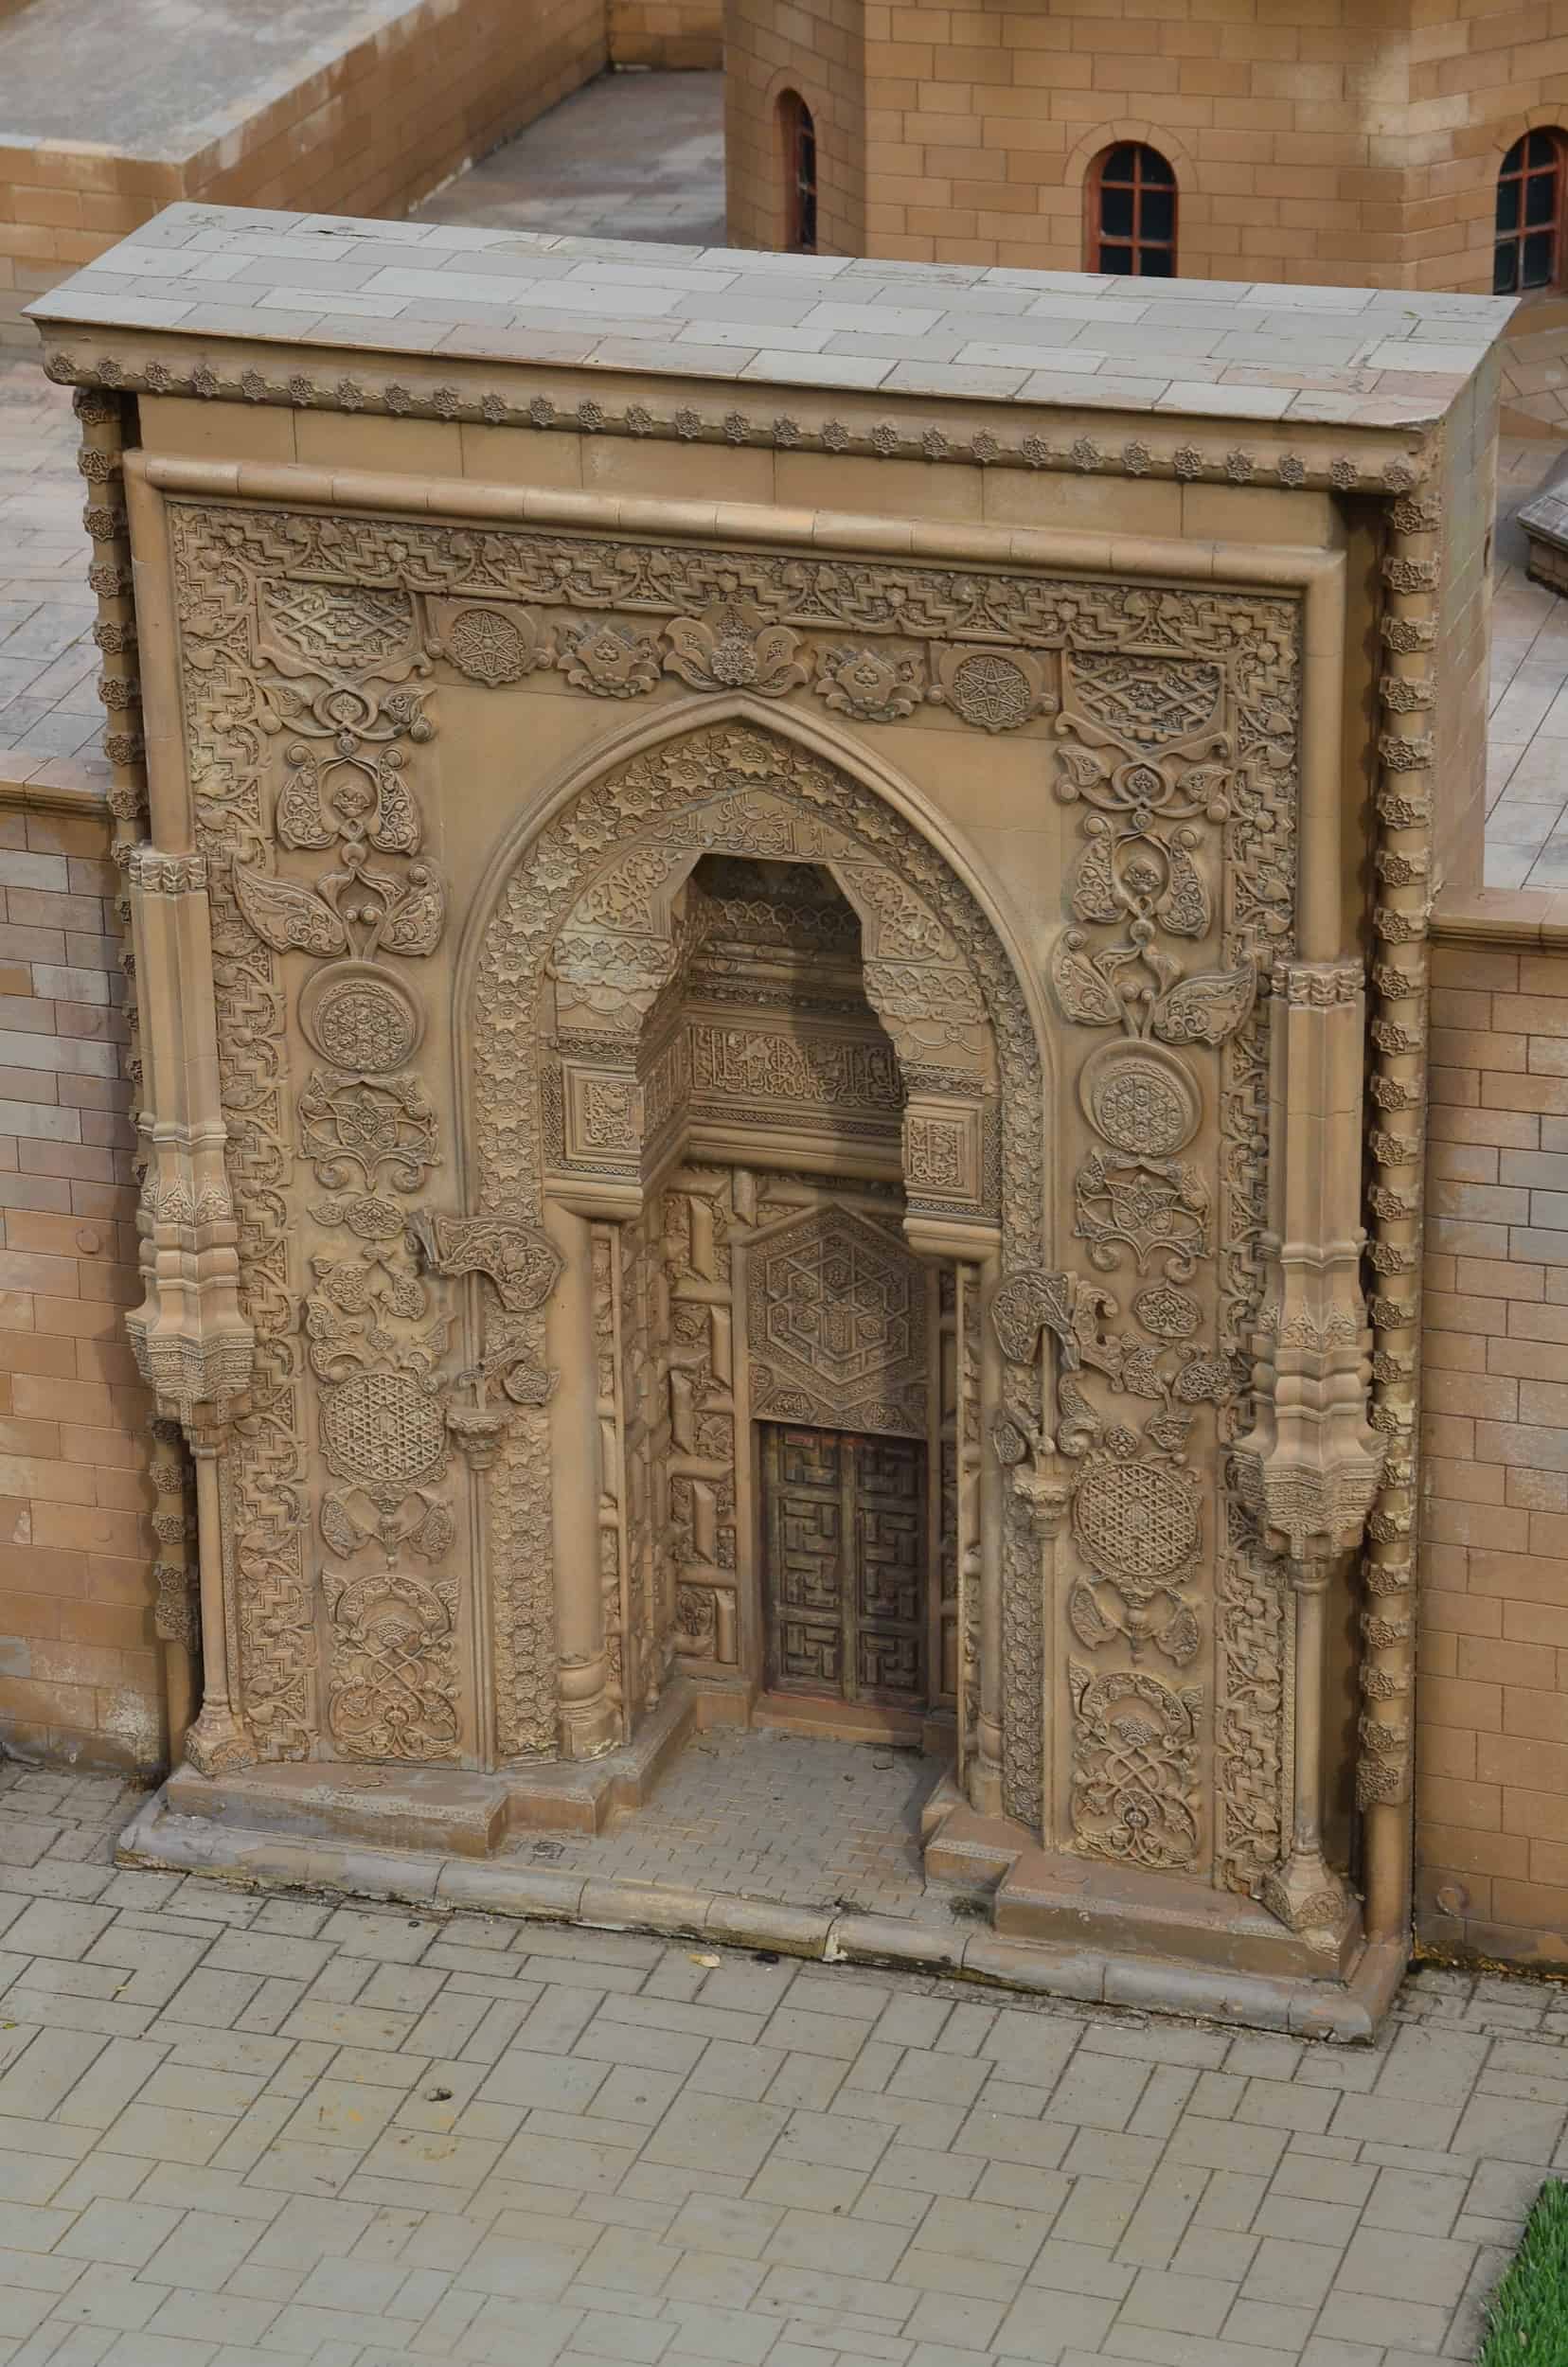 Model of the Great Mosque of Divriği, 13th century